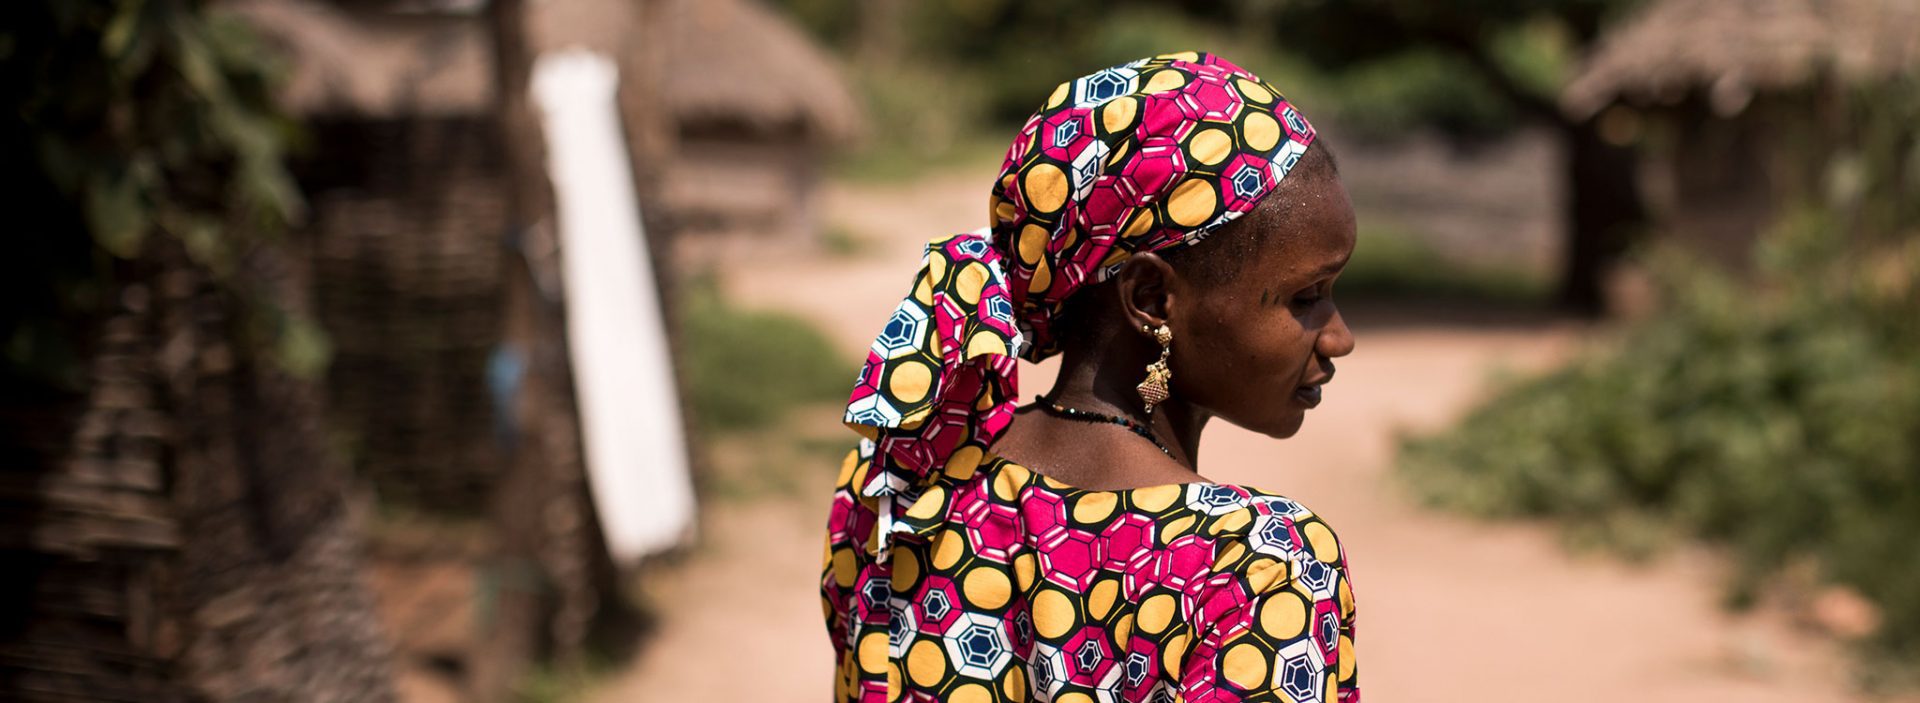 Hawa, an Action Against Hunger community health worker in Mali.